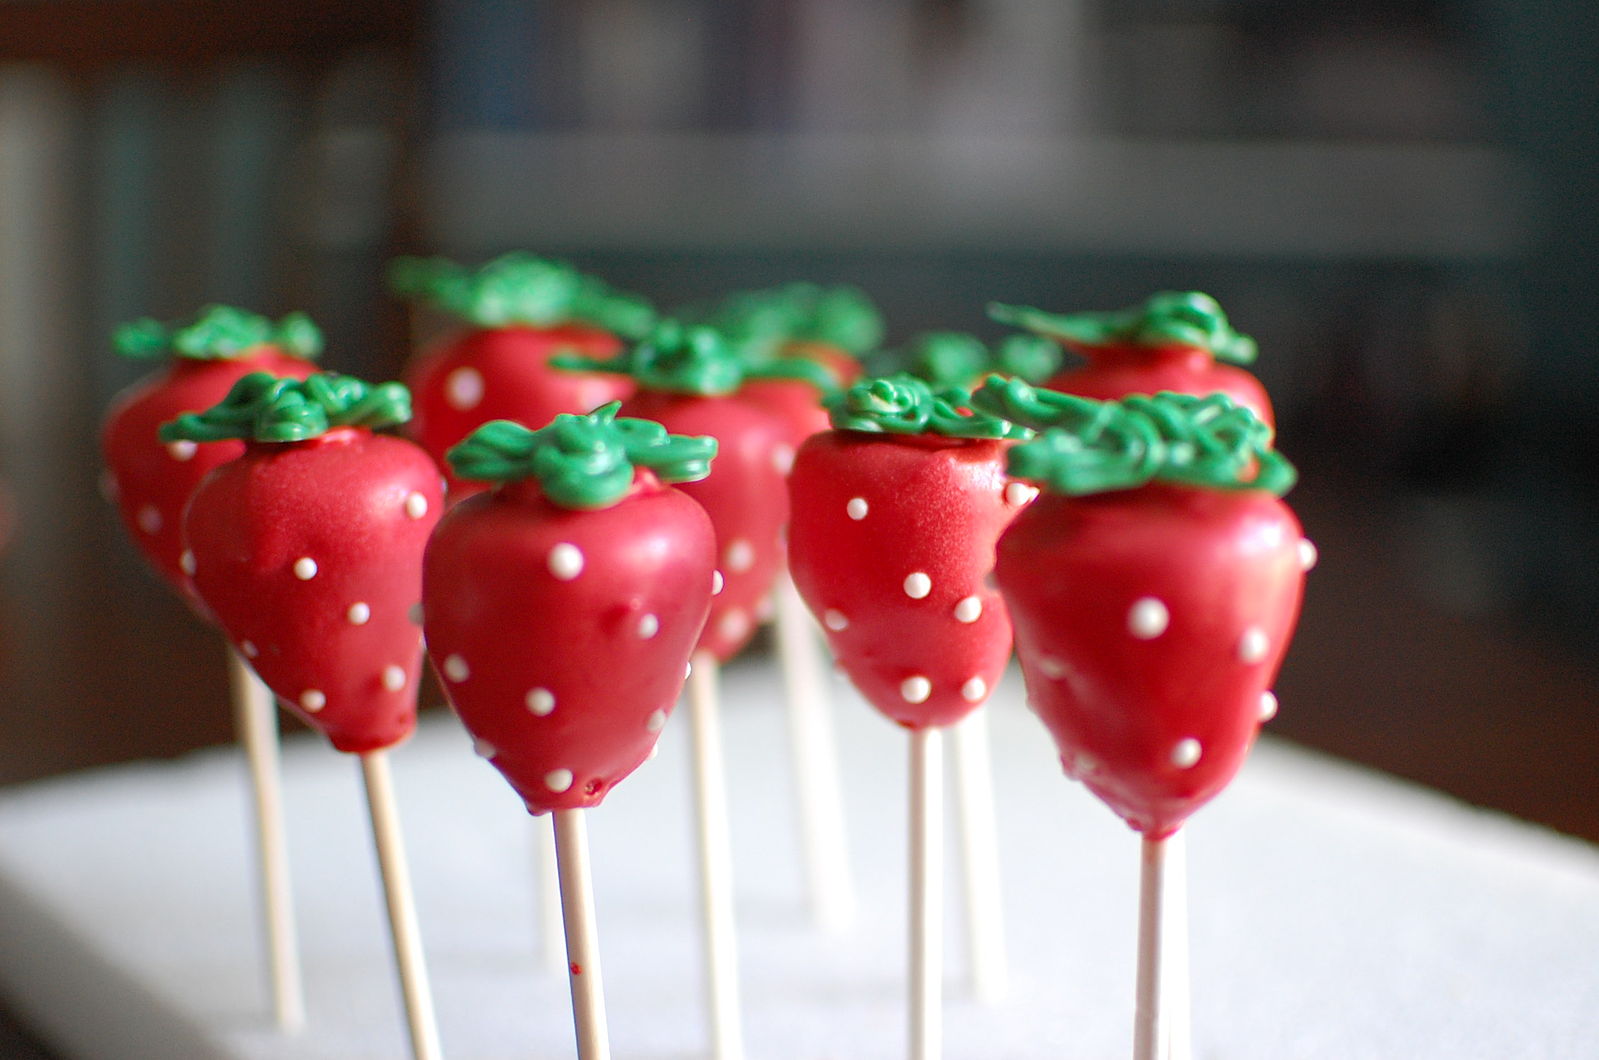 A few cake pops decorated as small strawberries!!